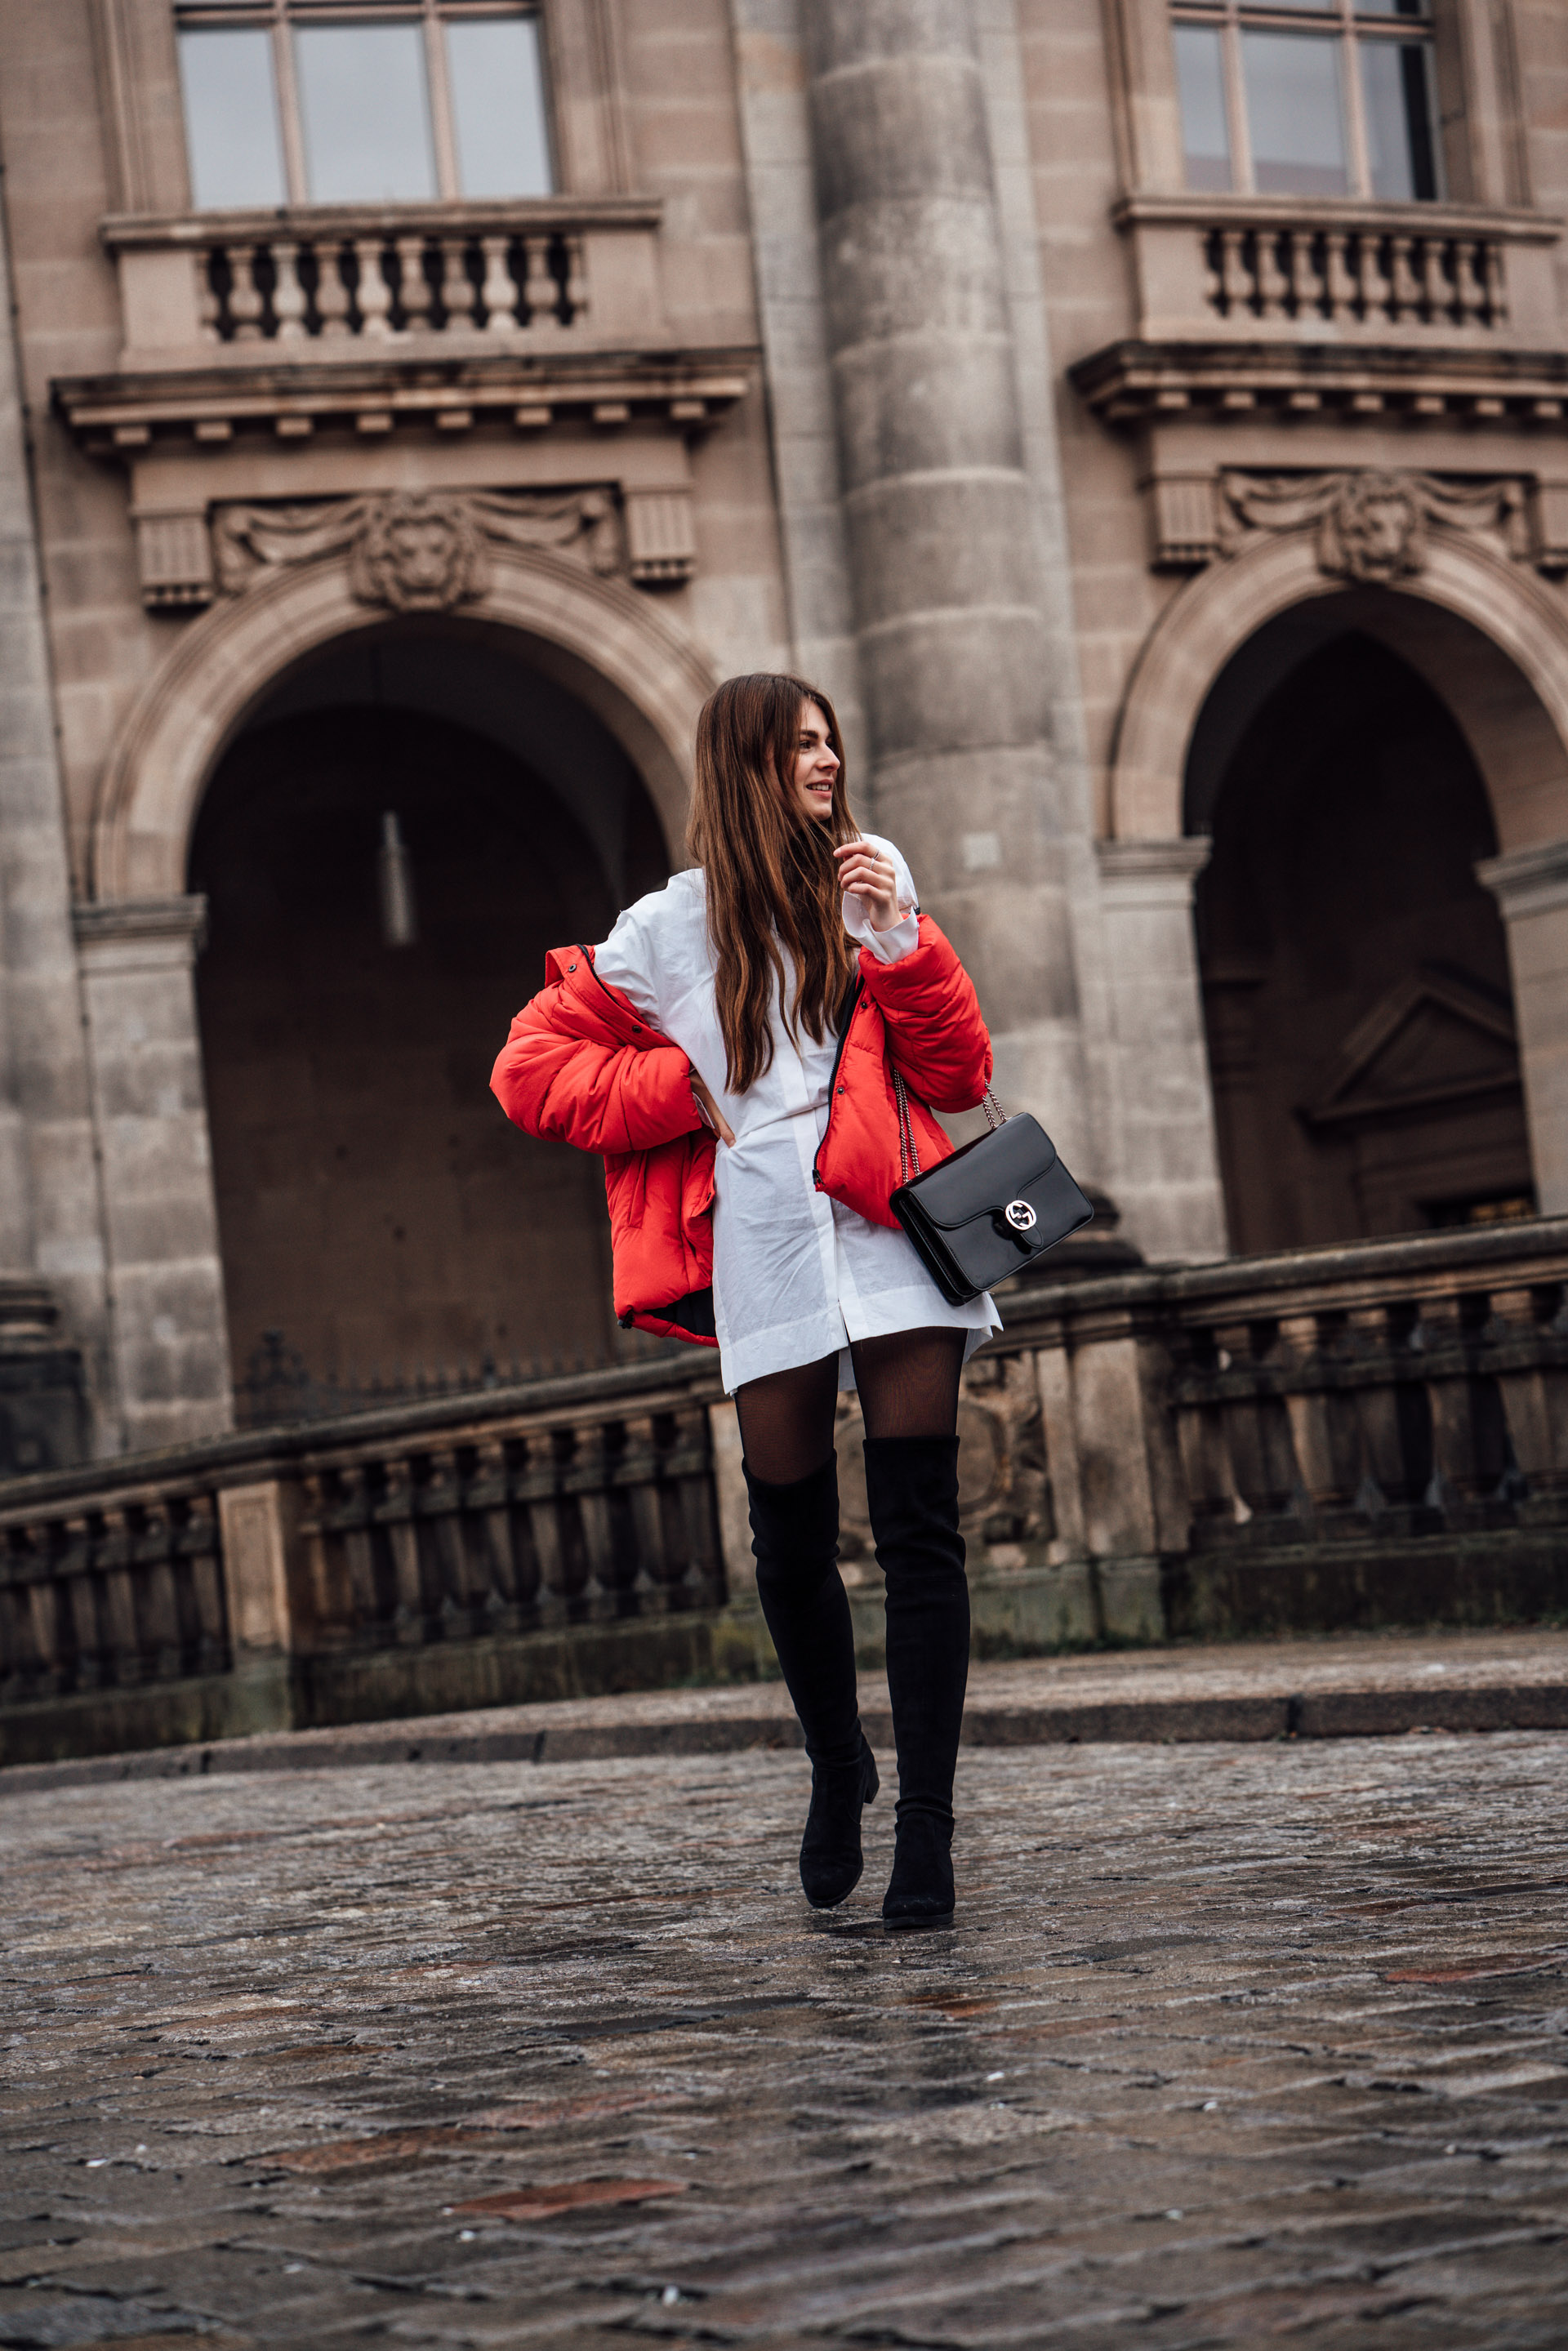 How to style a red puffer jacket || Berlin Fashion Week Streetstyle